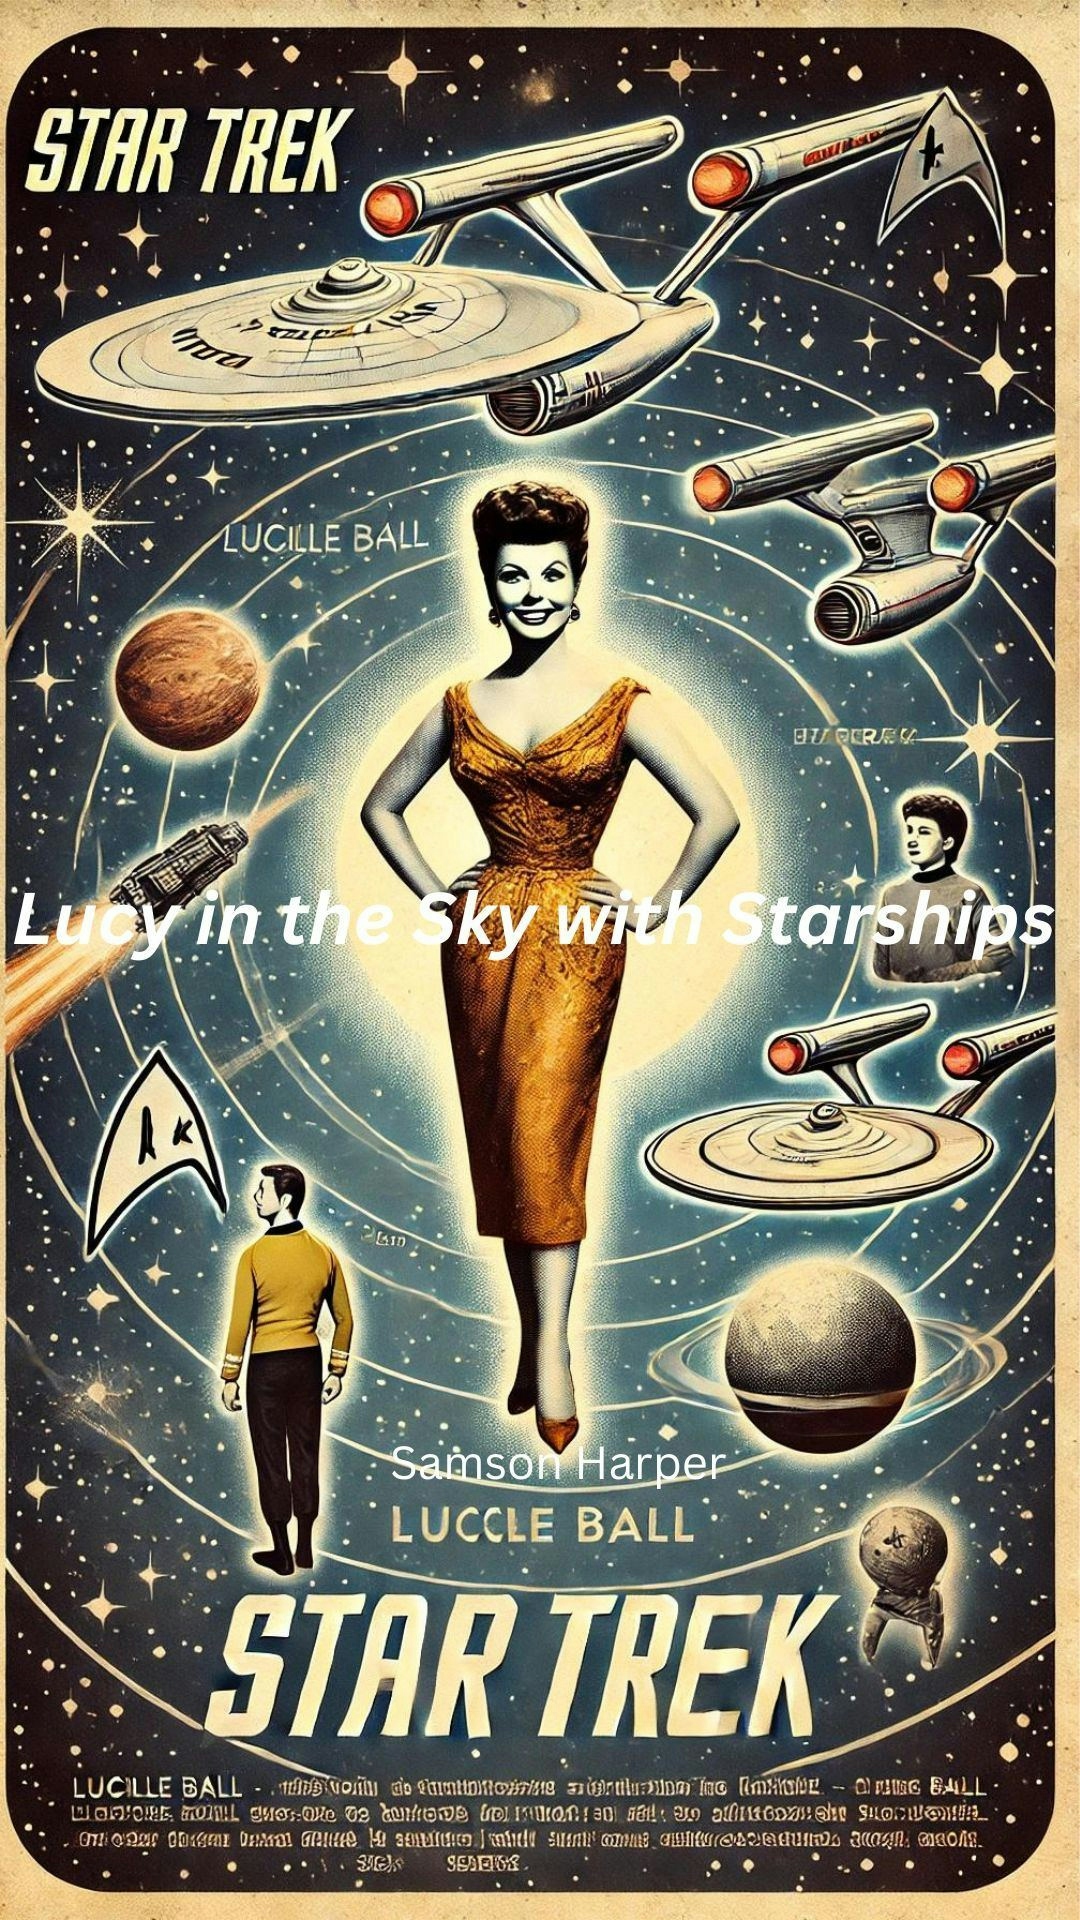 Lucy in the Sky with Starships: Lucille Ball's Influence on Star Trek